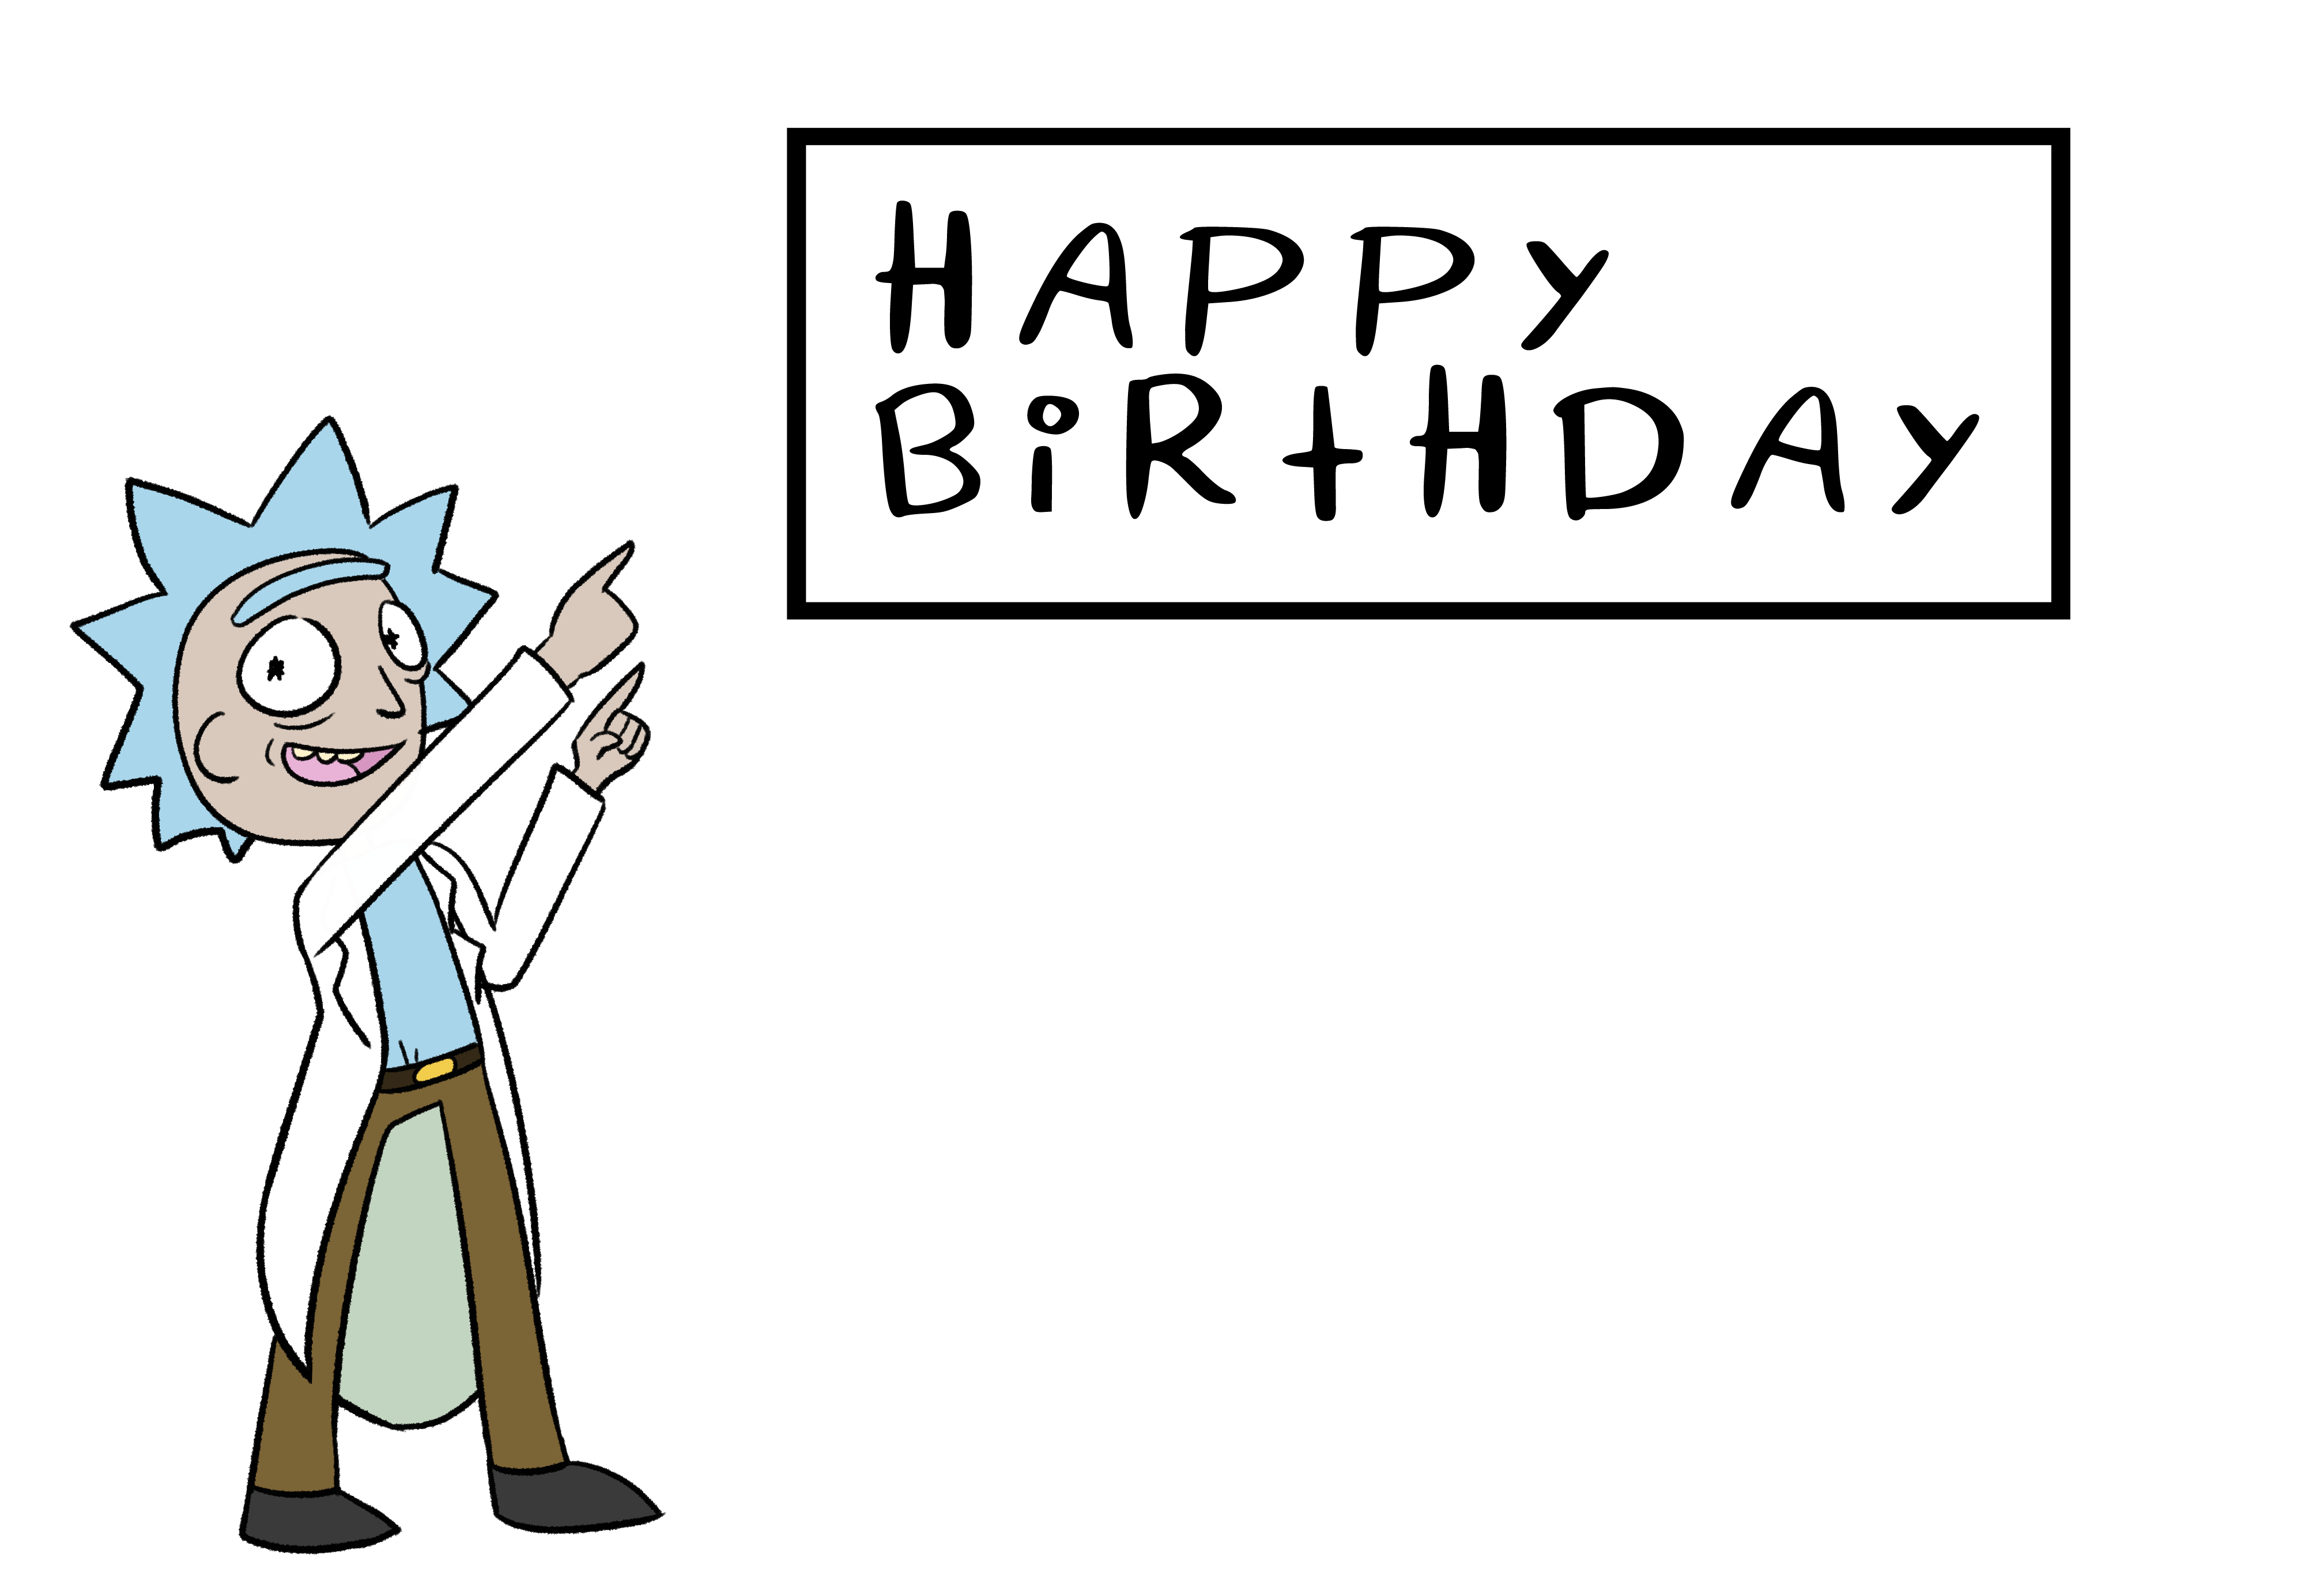 Happy Birthday Rick And Morty Font Happy Birthday free images, download .....